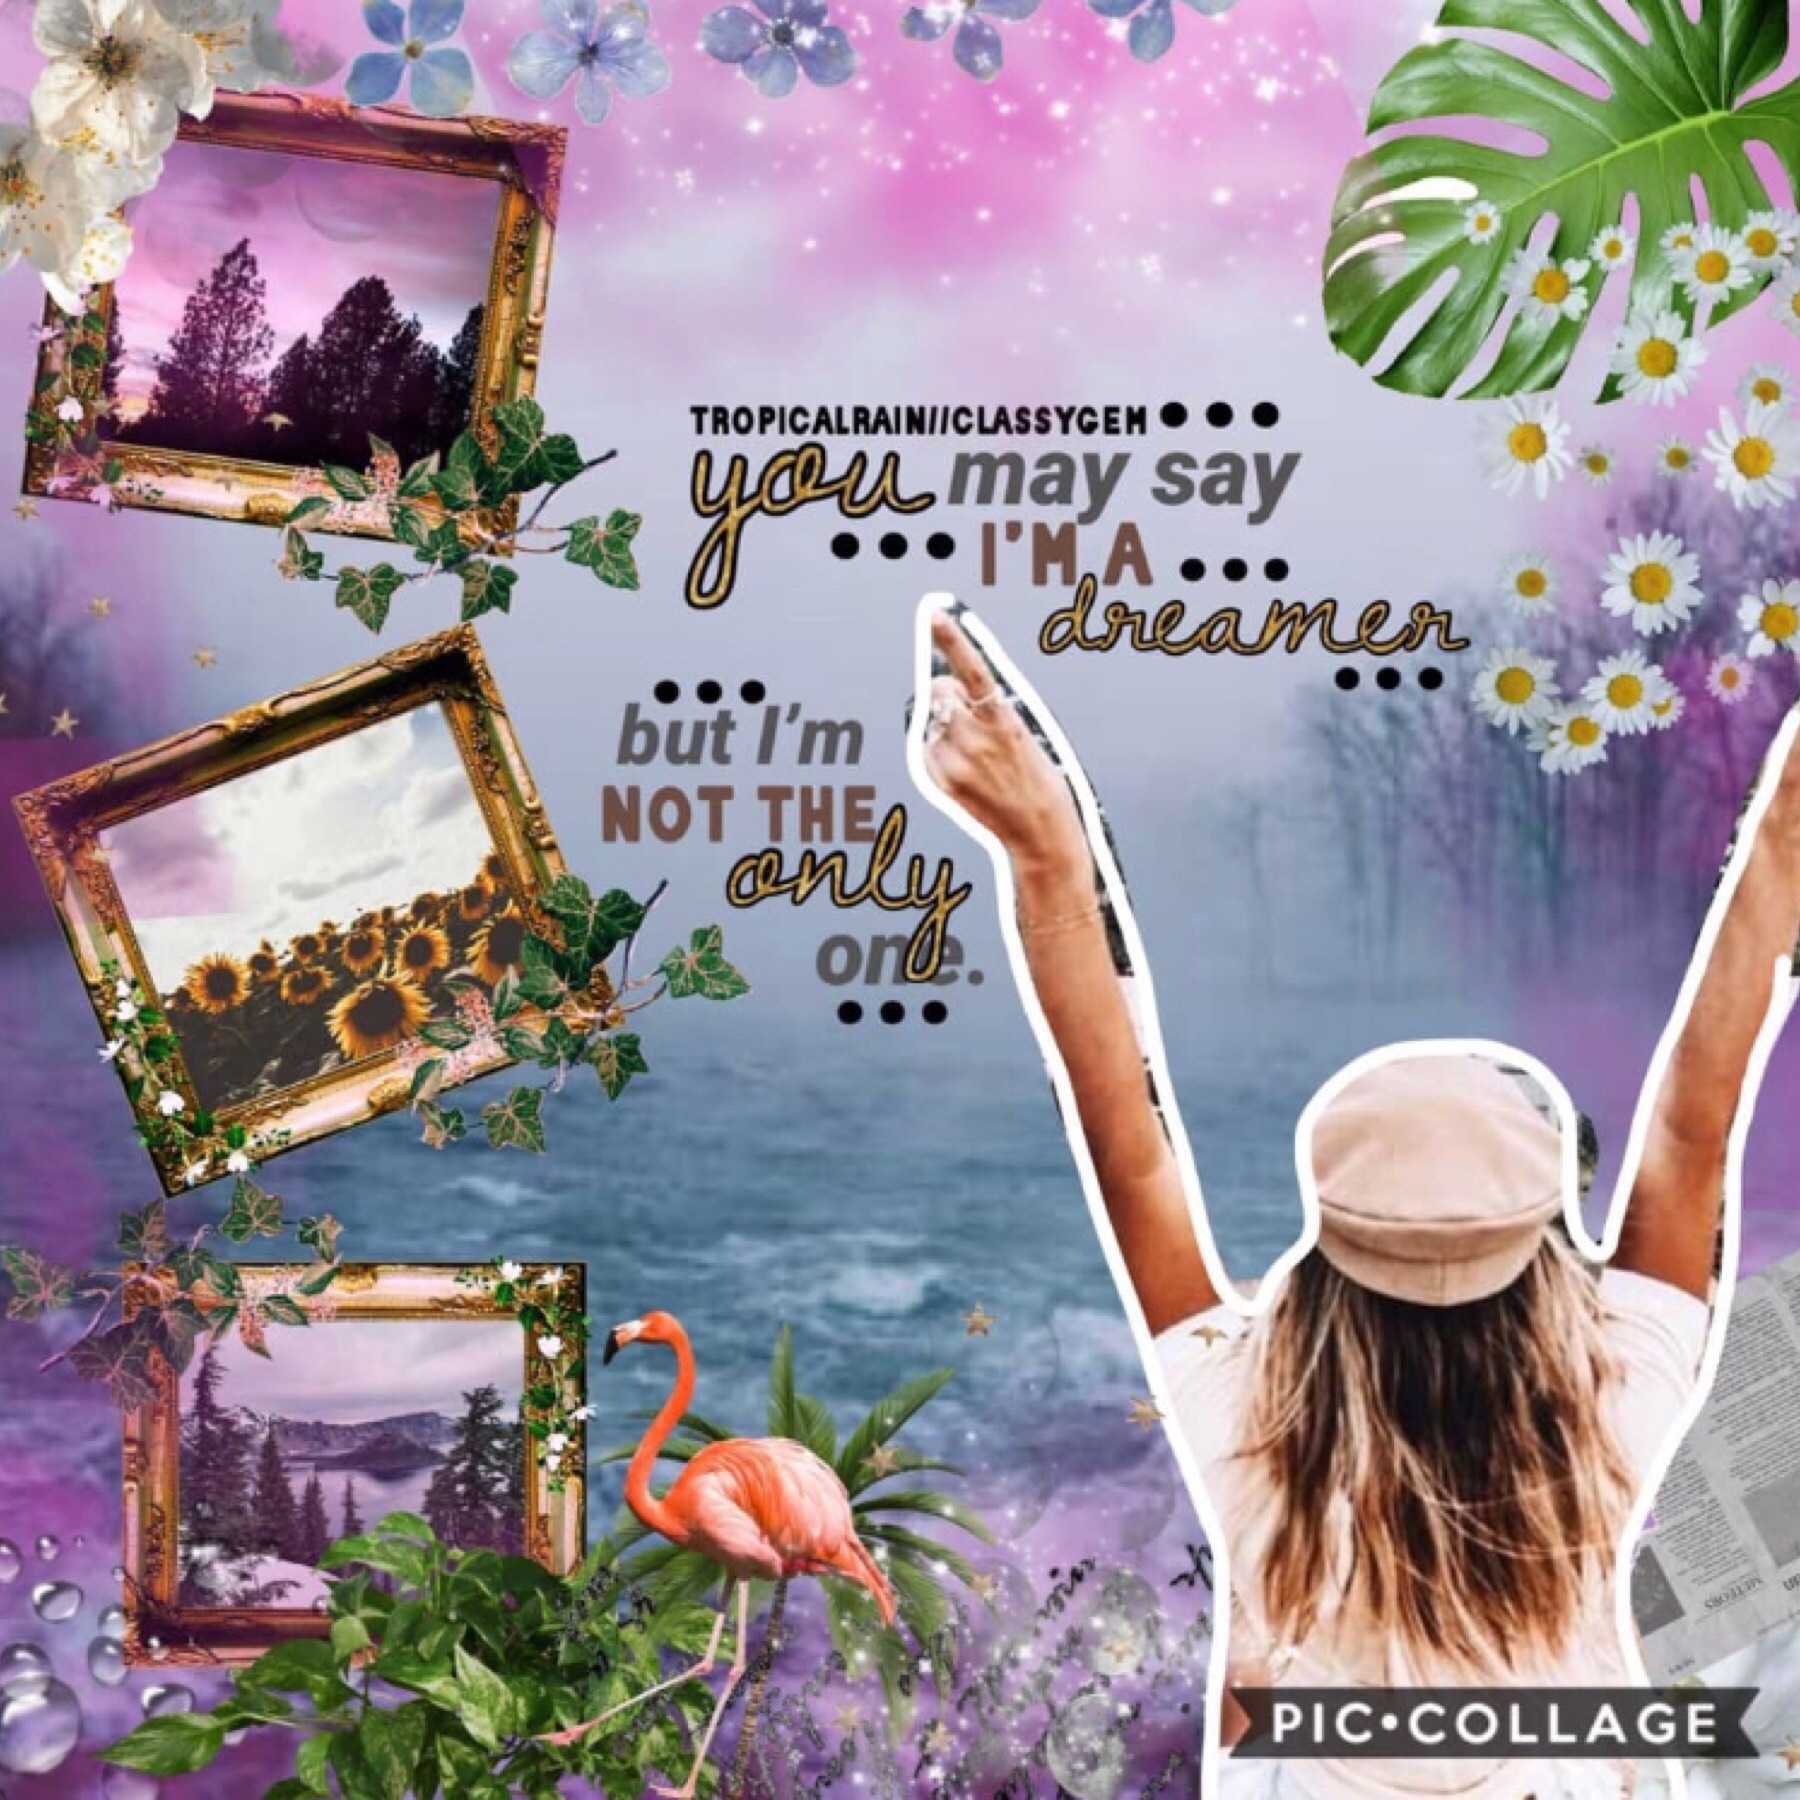 💗 t a p 💗
COLLAB WITH THE AMAZING @CLASSYGEM! (go follow her!)
I chose the pic and she put it all together!
QOTD: favorite place you’ve traveled?
AOTD: Kadavu, Fiji